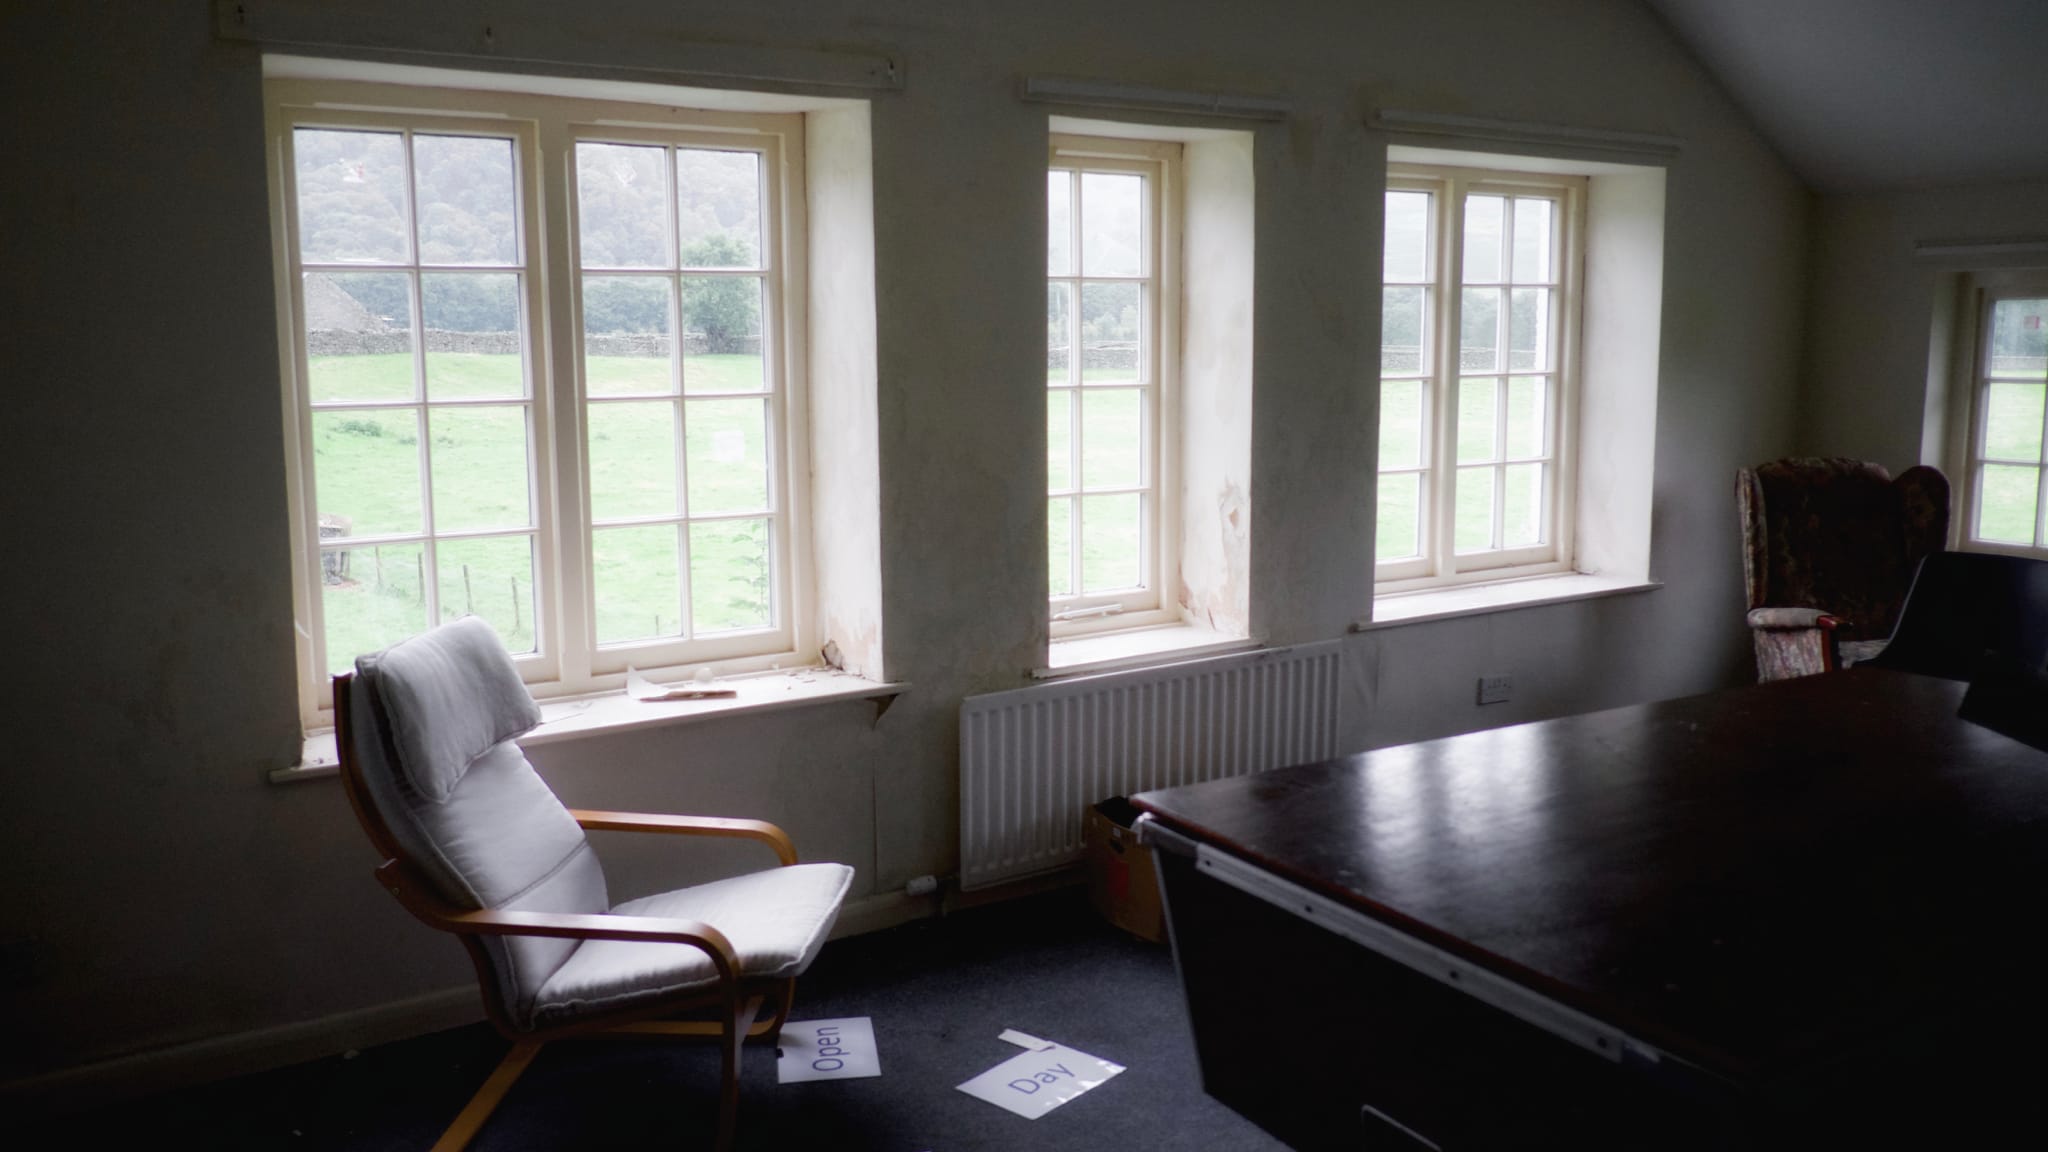 The upstairs meeting room of the Borrowdale Institute